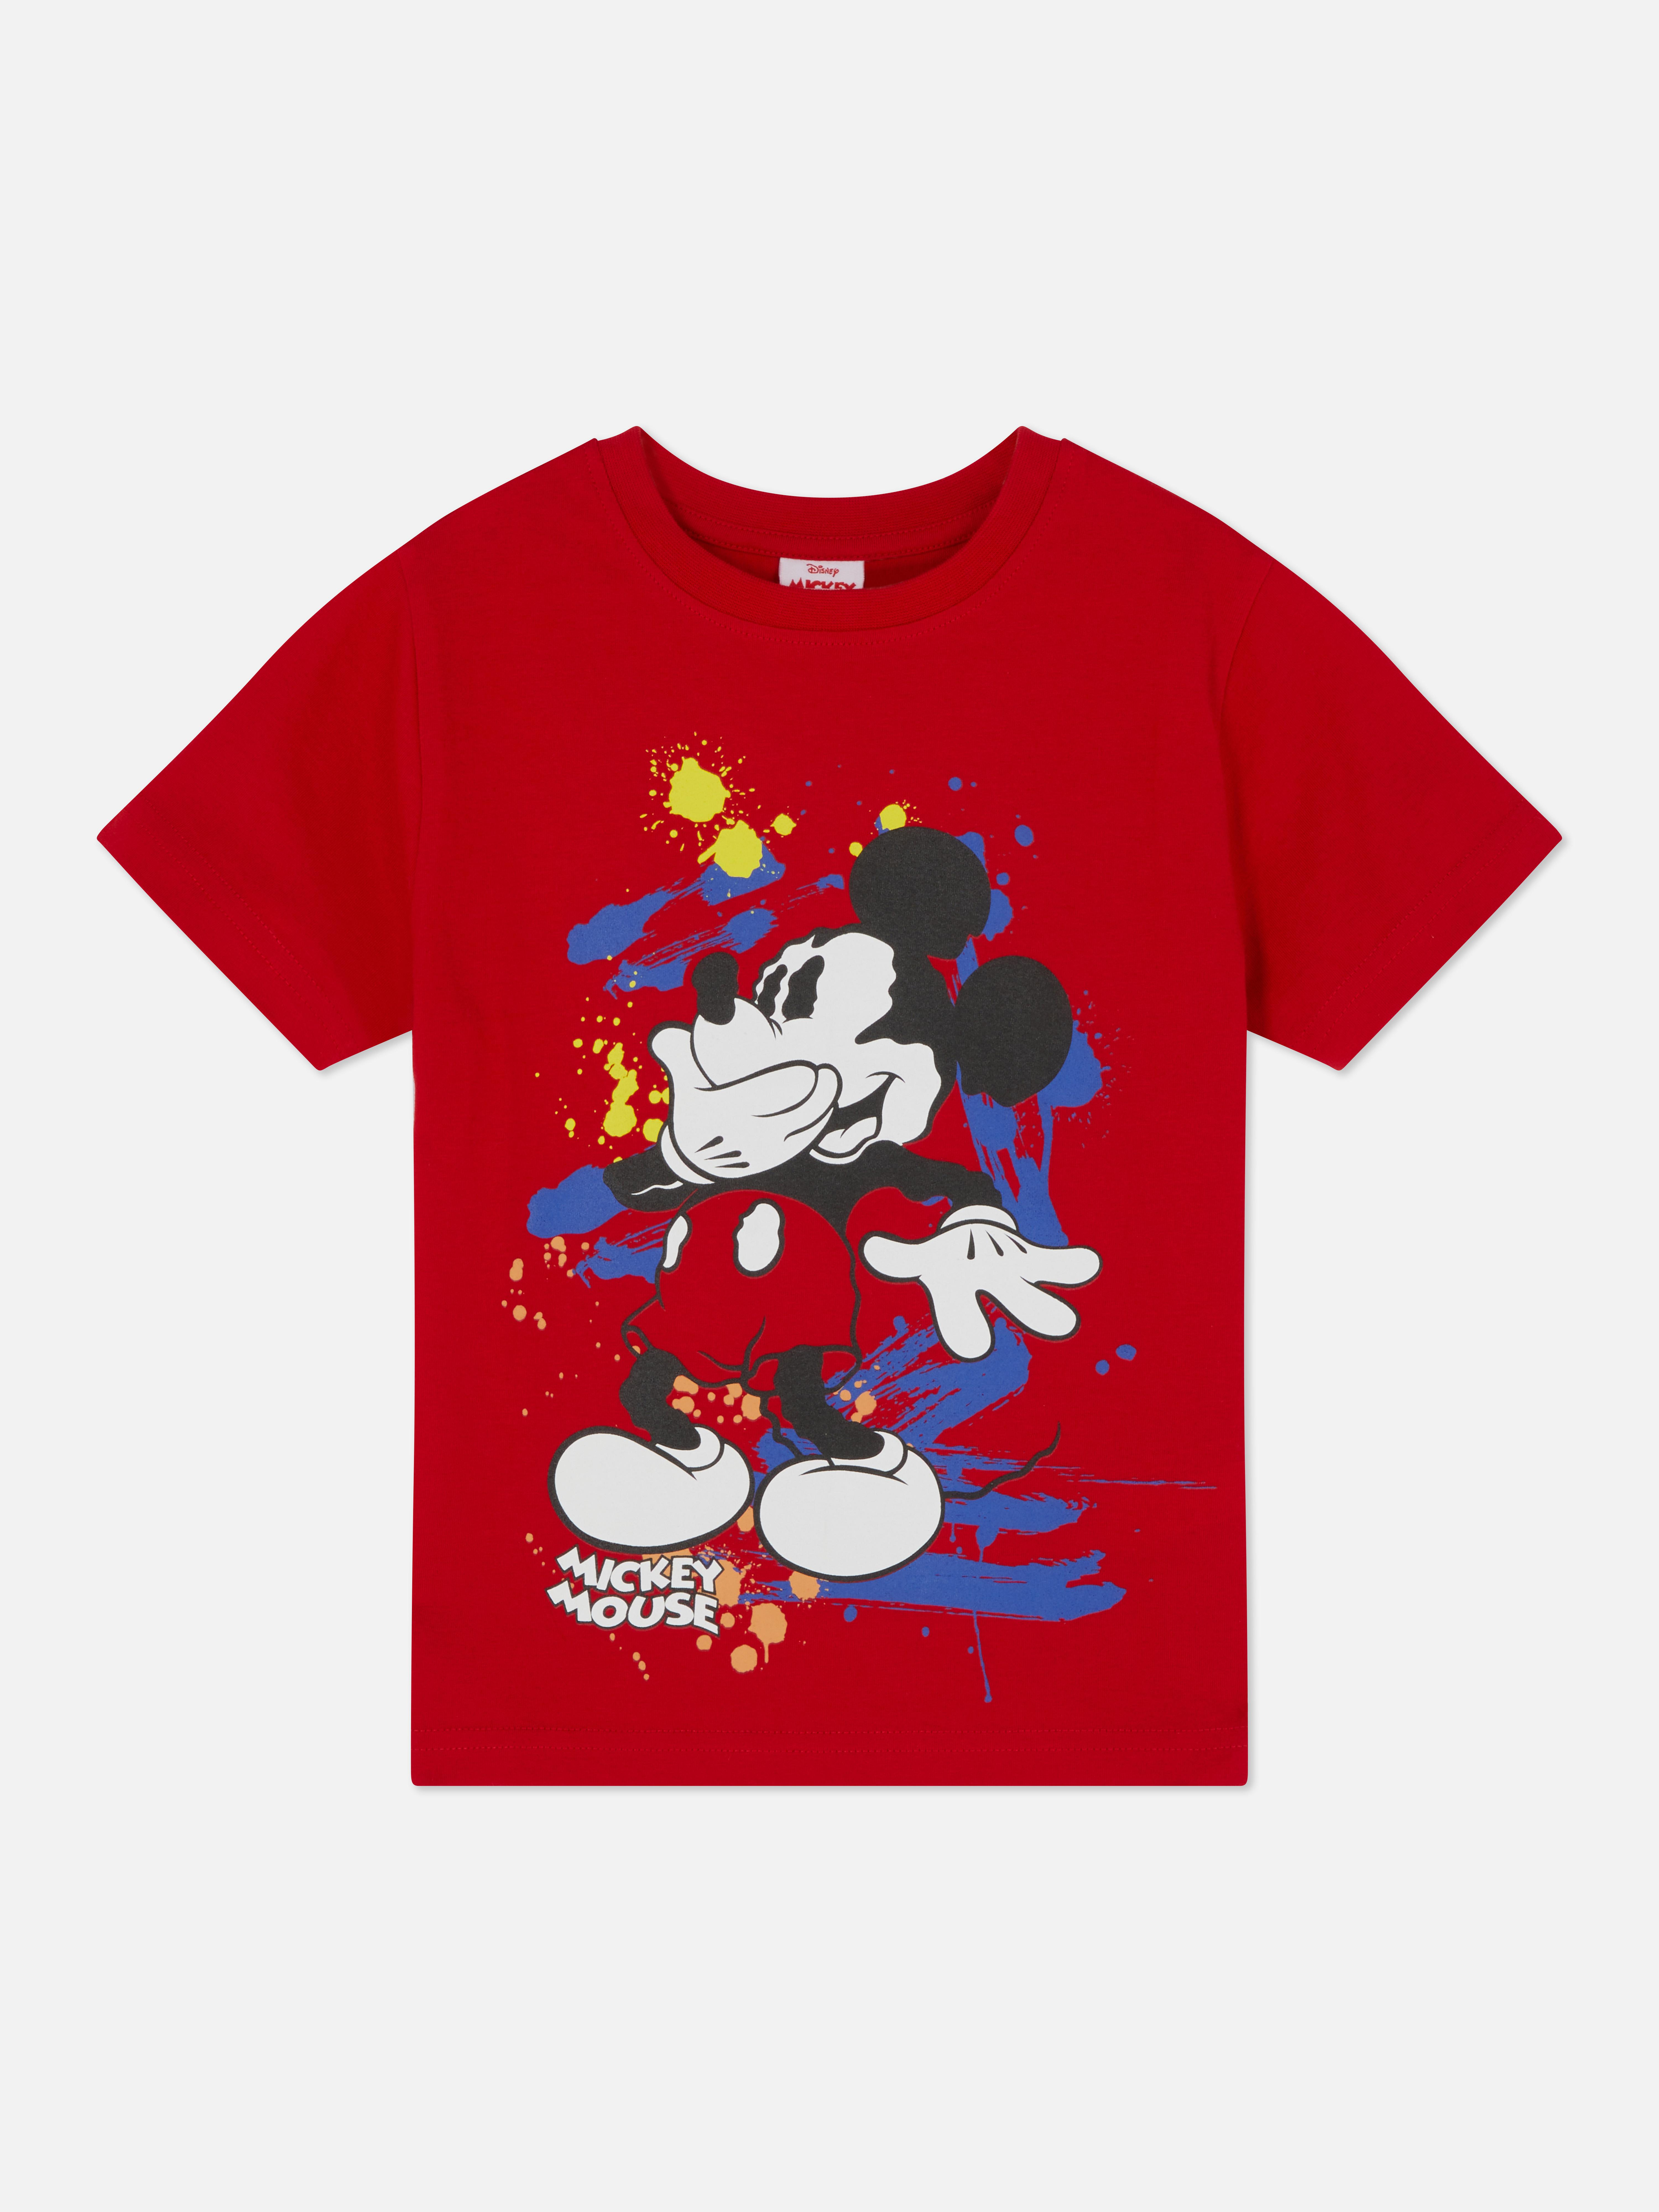 Disney’s Mickey Mouse Graphic T-Shirt